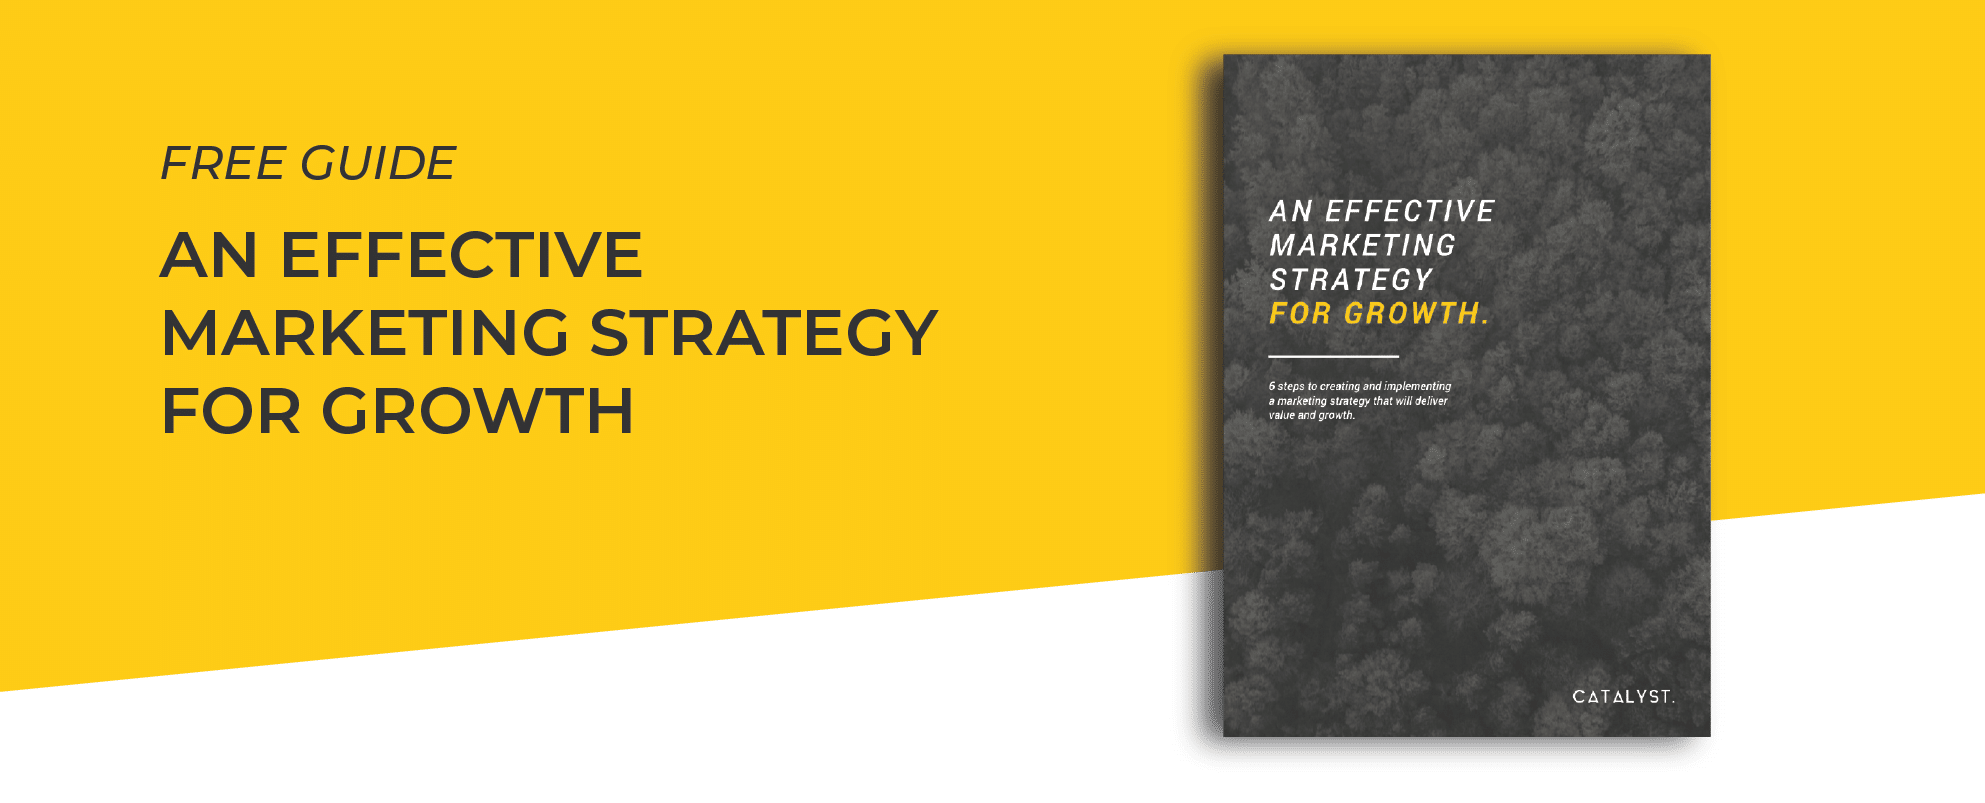 effective strategy Email background yellow